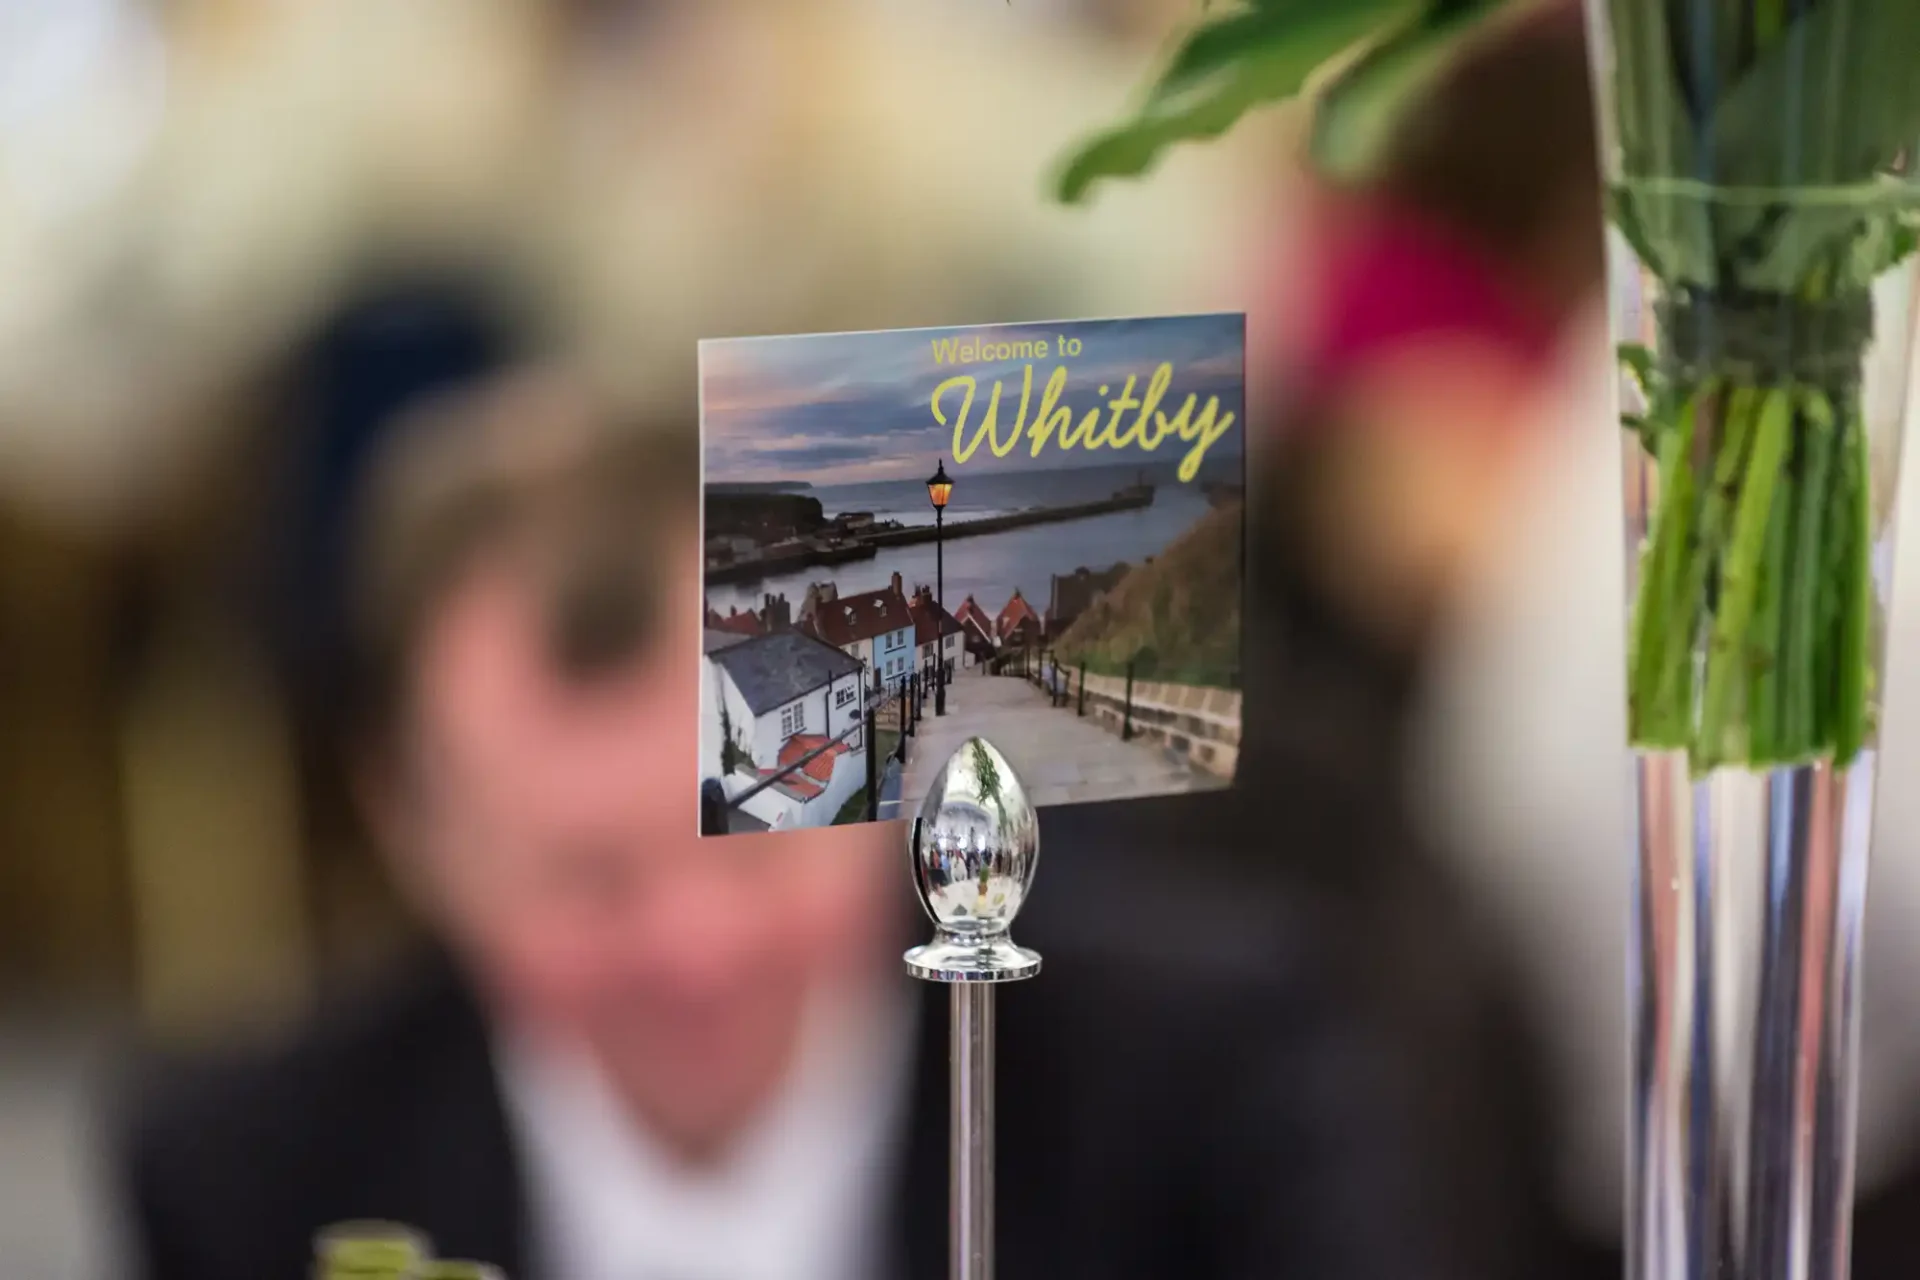 Table decoration featuring a clear drop-shaped glass with a blurred background showing a man and a "welcome to whitby" postcard.